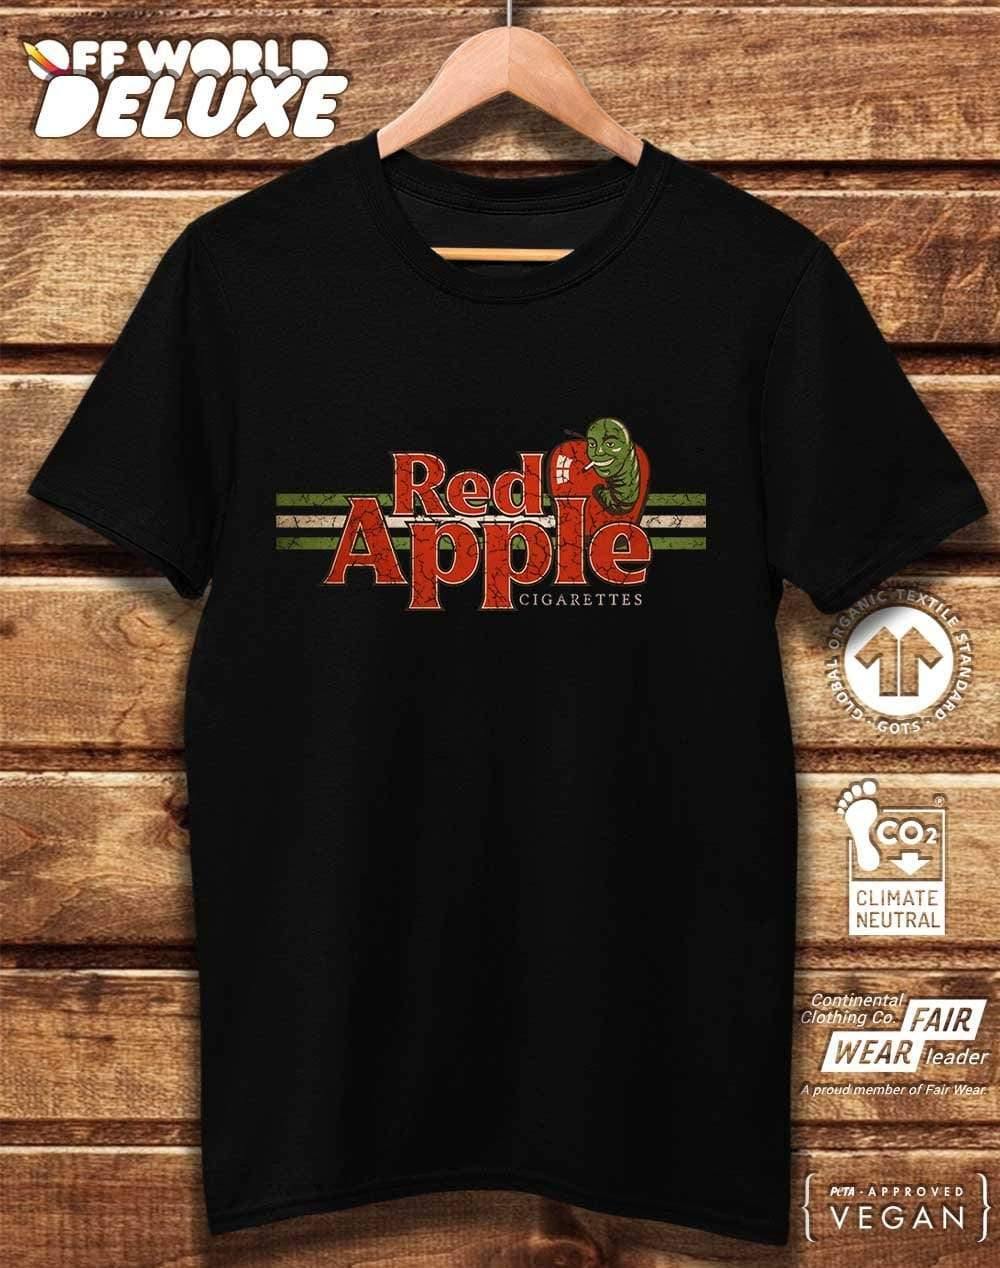 DELUXE Red Apple Cigarettes Organic Cotton T-Shirt  - Off World Tees